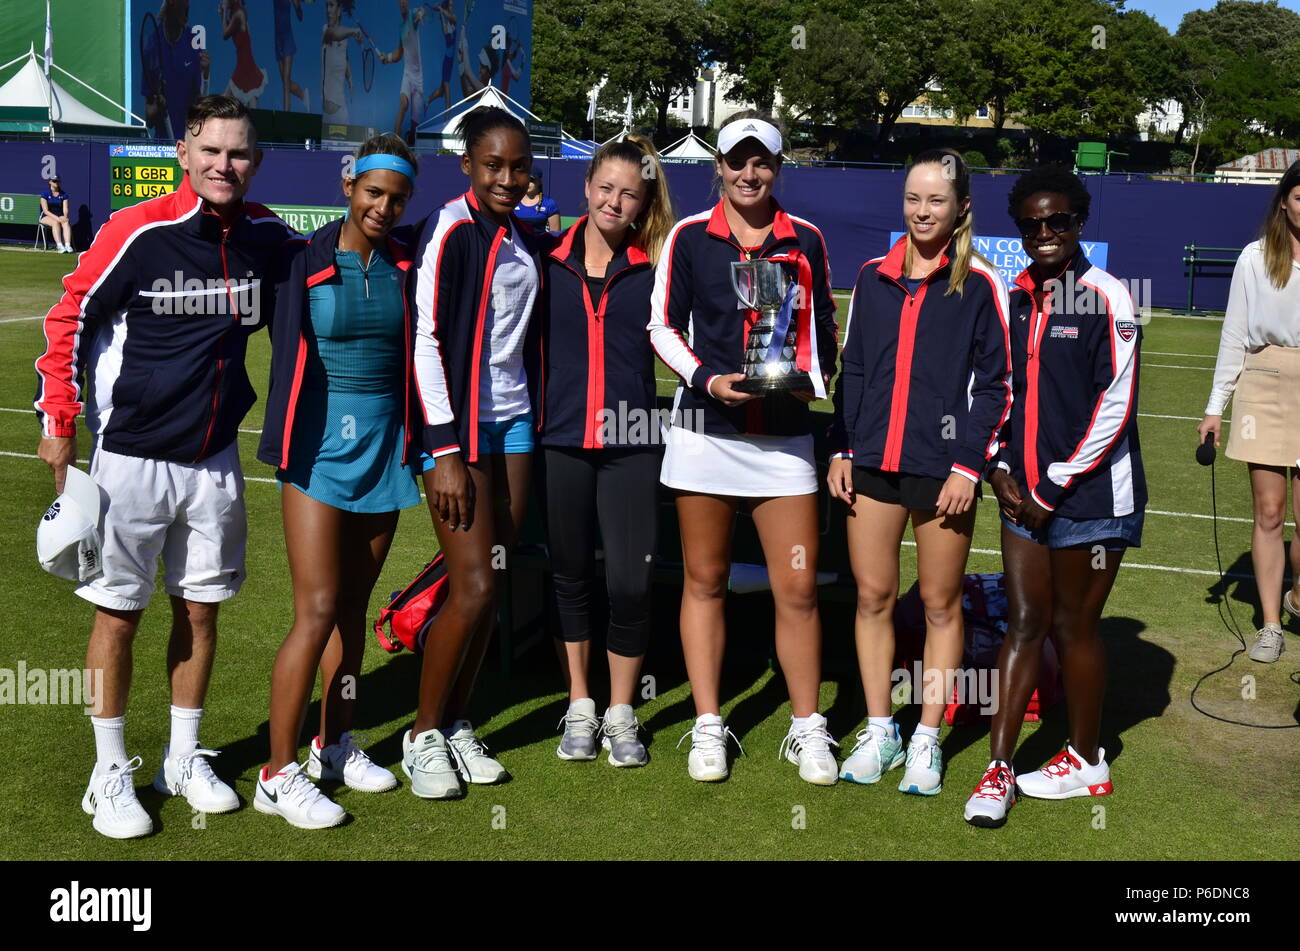 29th June, Eastbourne, UK. USA team win the Maureen Connolly Challenge Trophy. International junior competition between the USA and GB teams. Credit: PjrFoto/Alamy Live News Stock Photo